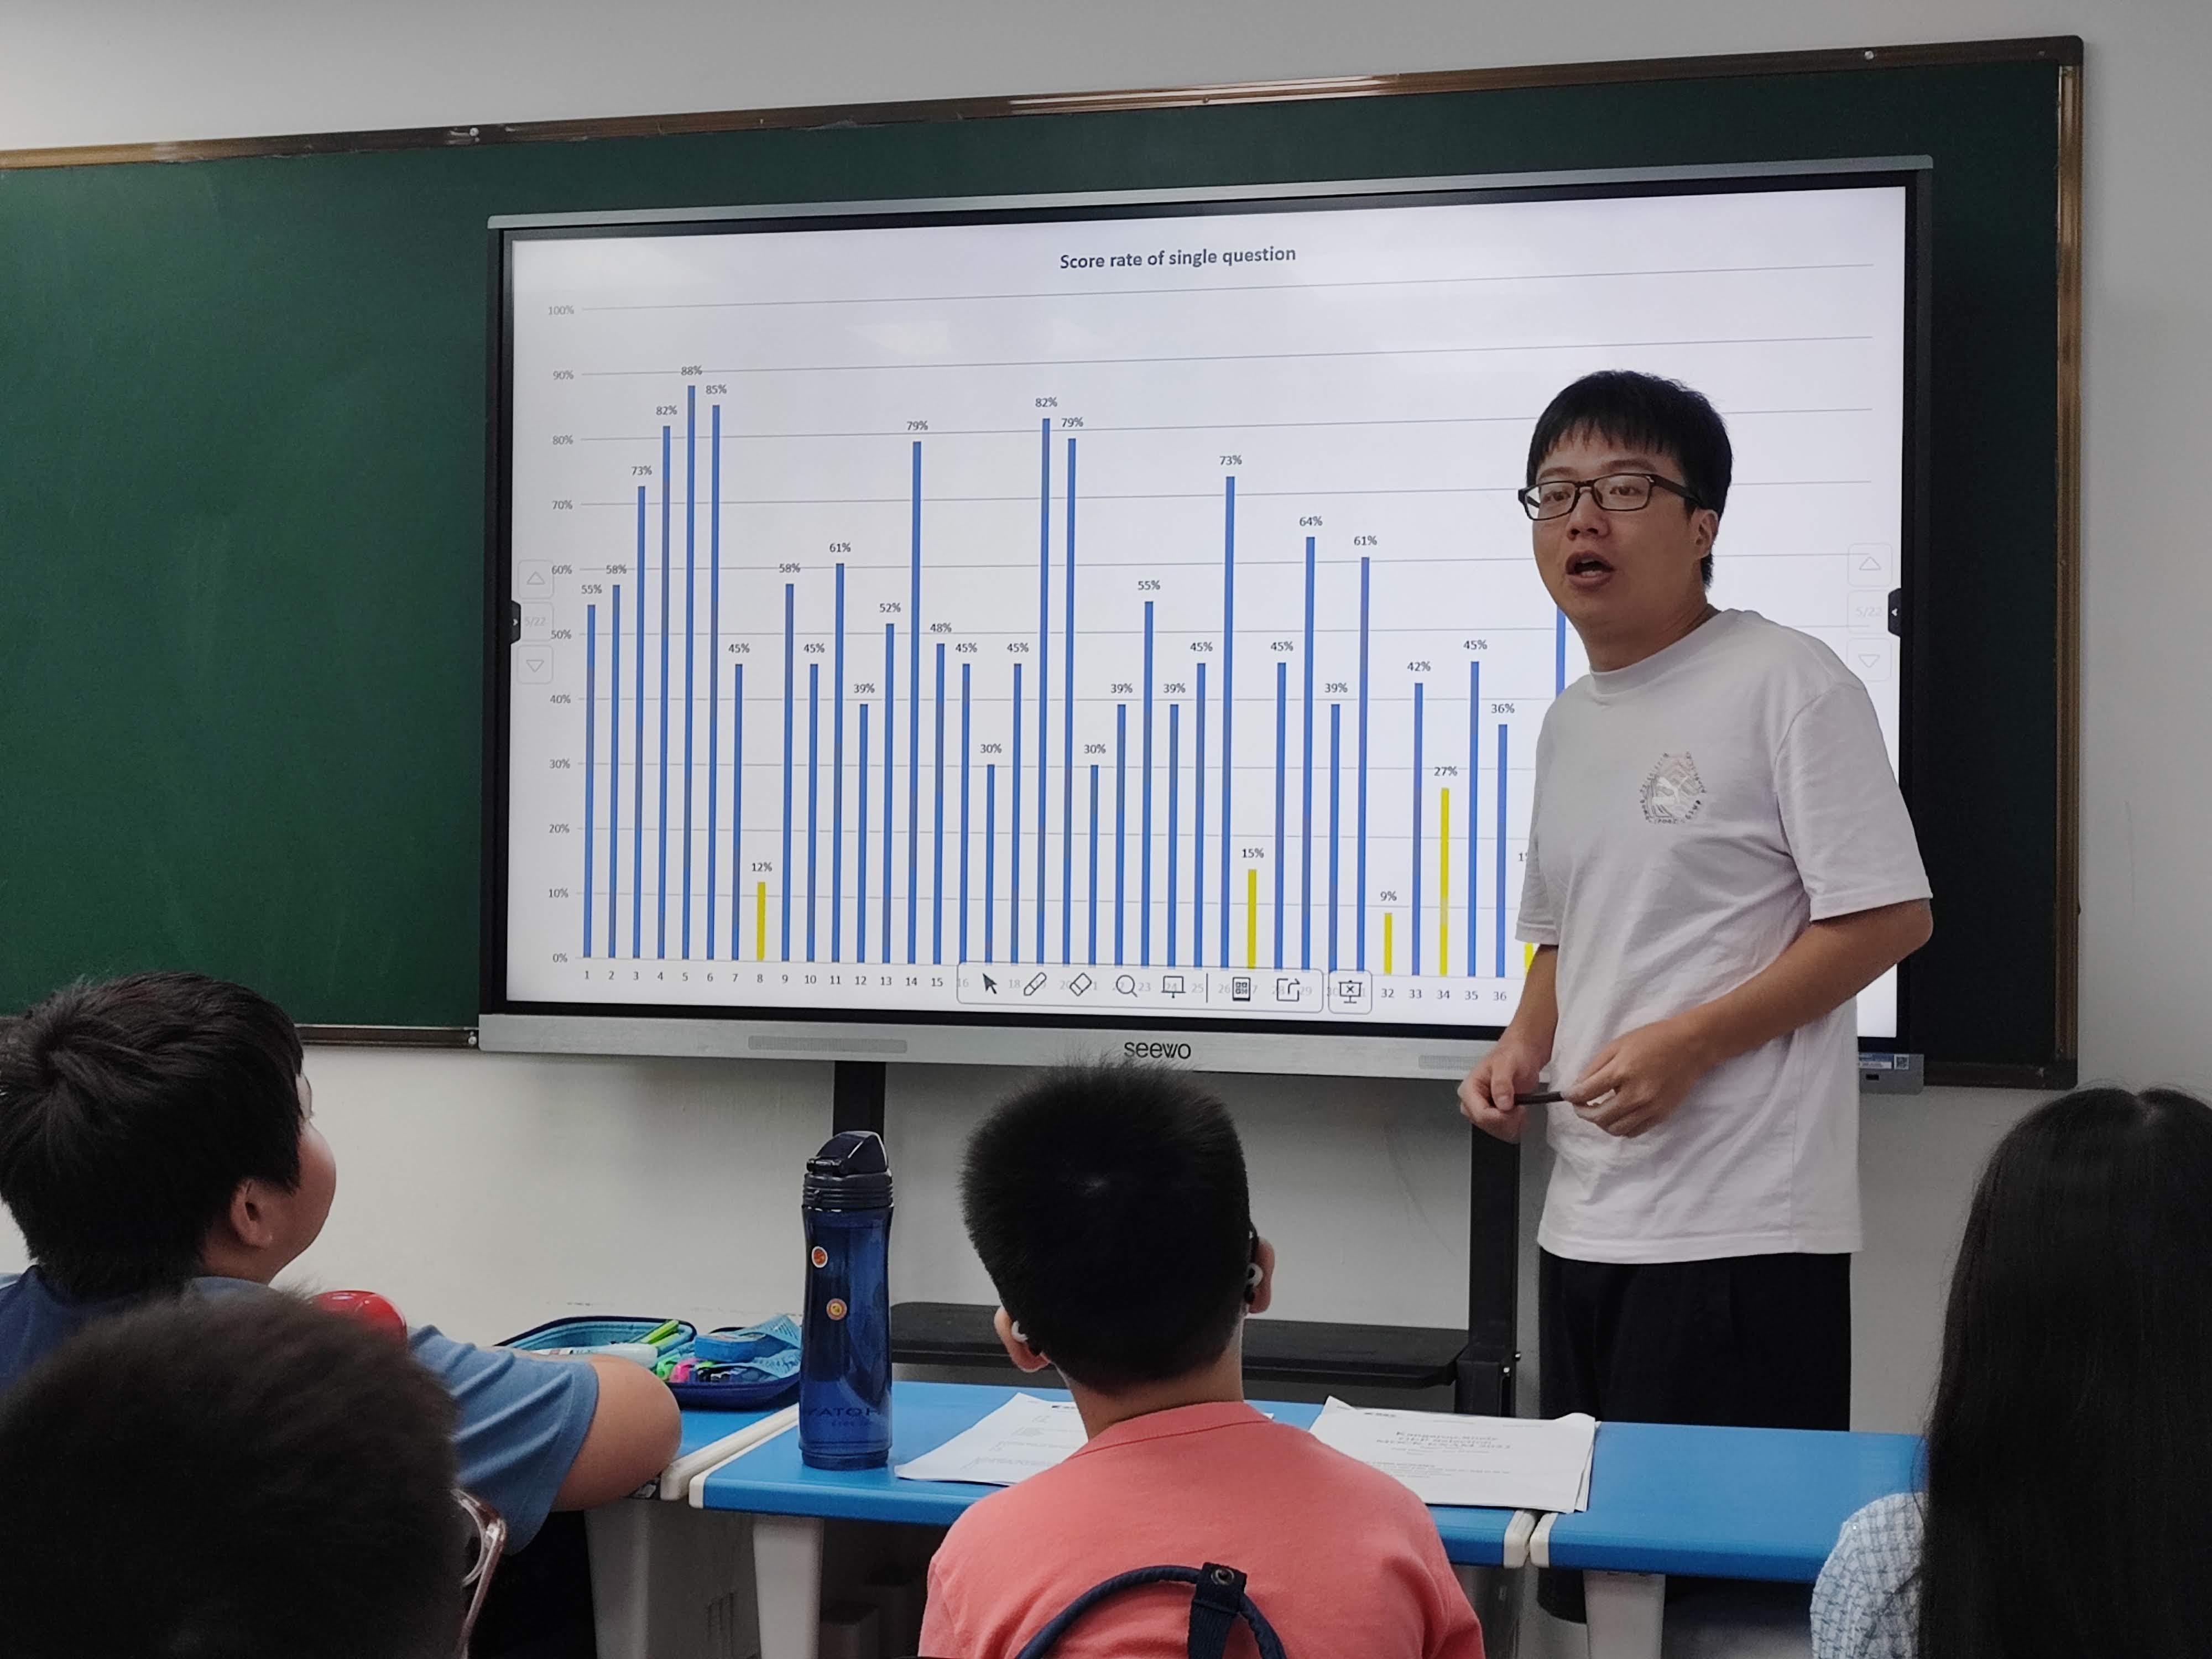 Teacher Zhang explaned about students's grade and question analysis